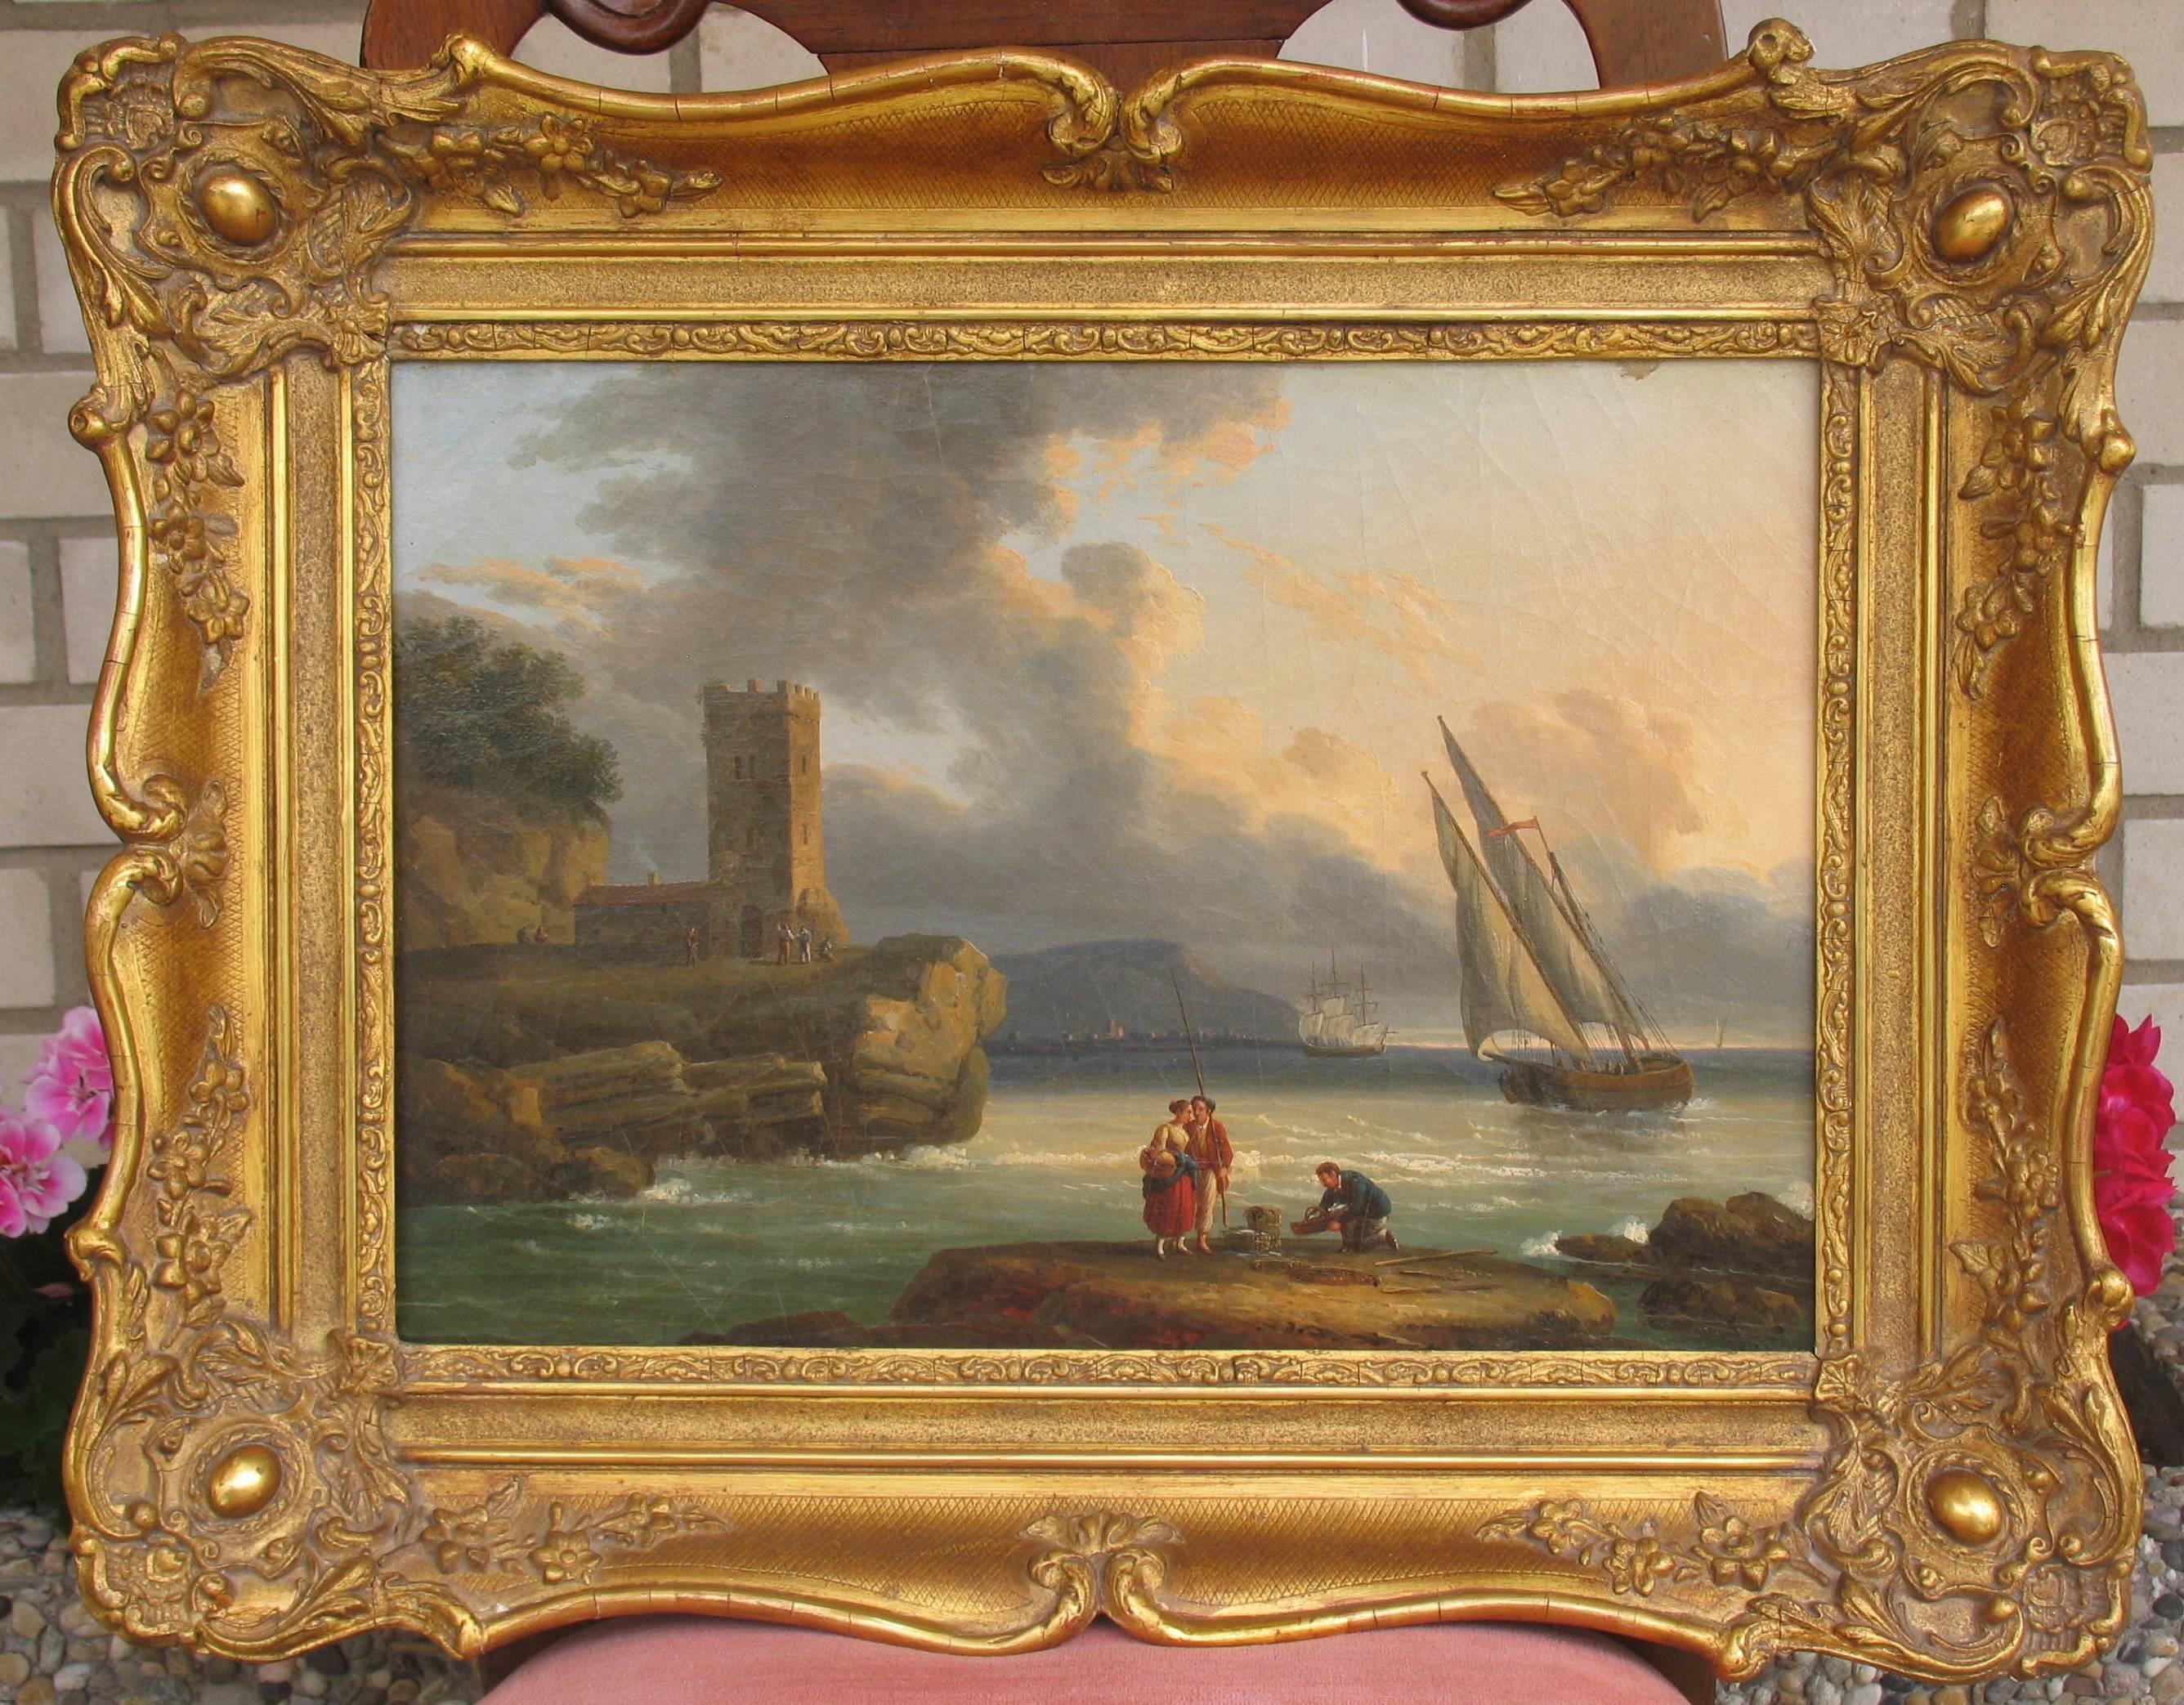 Unknown artist, in the manner of Claude Joseph Vernet (1714-1789), 